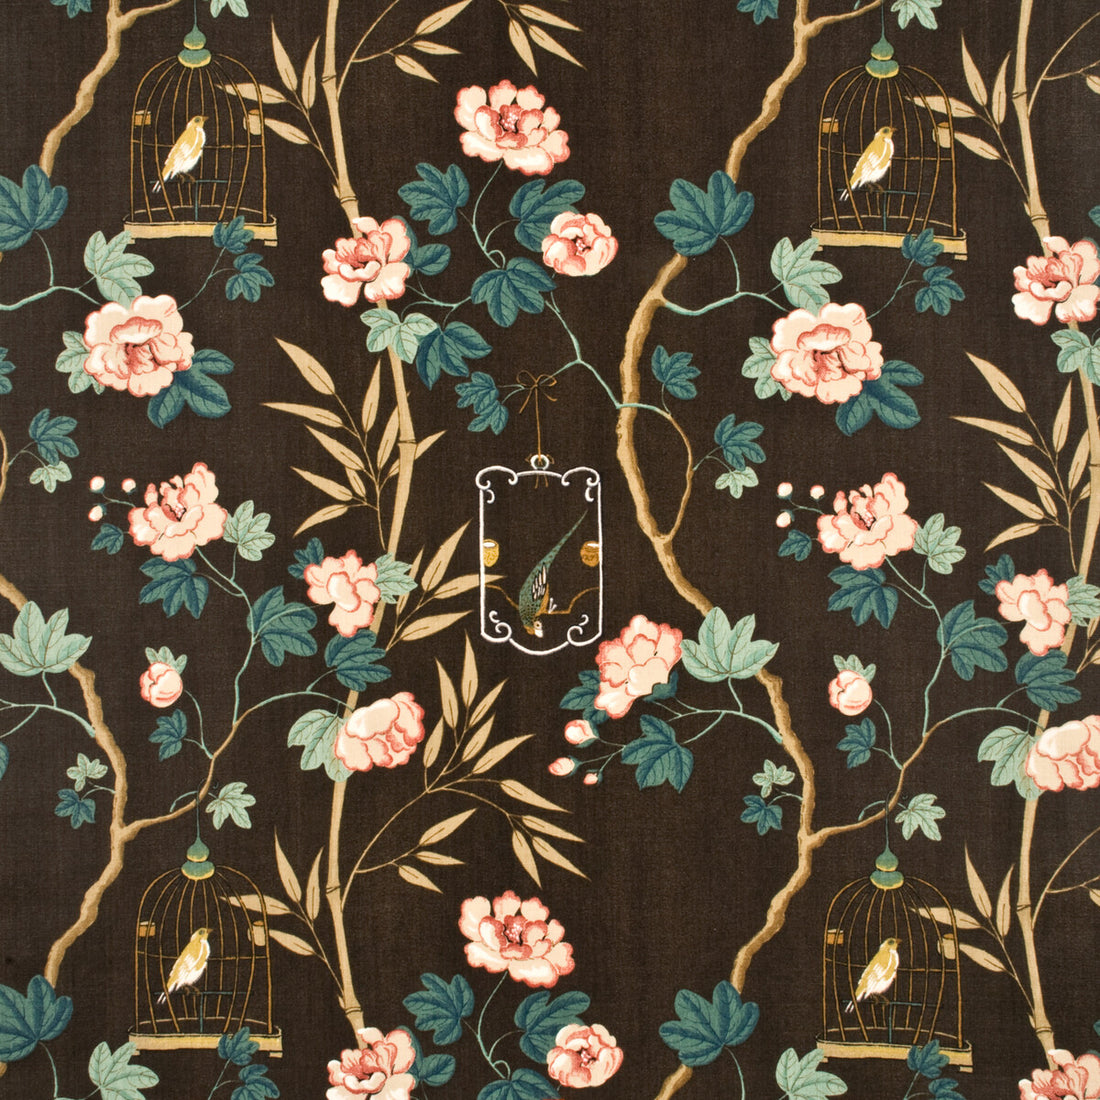 Songbird fabric in charcoal color - pattern BP10306.6.0 - by G P &amp; J Baker in the Emperor&